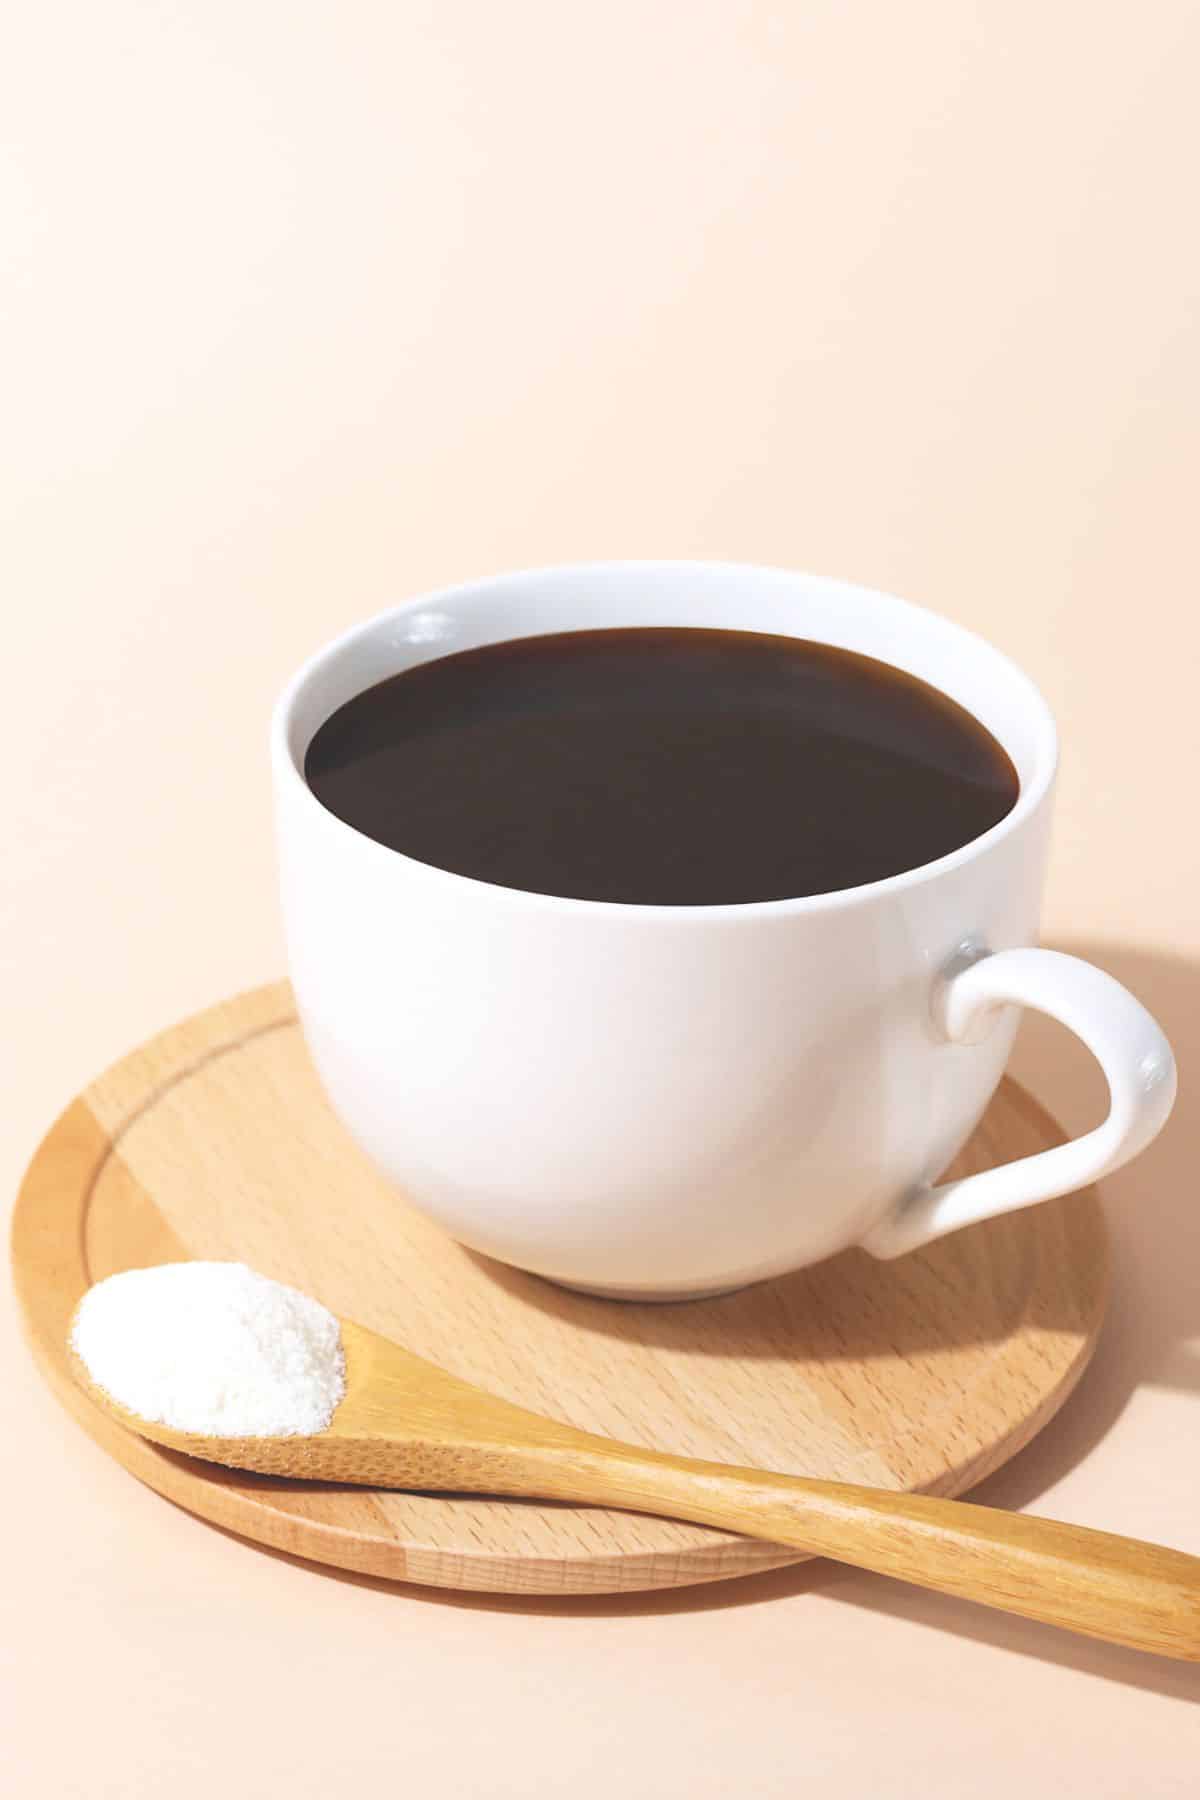 A spoon of collagen next to a white mug full of coffee.